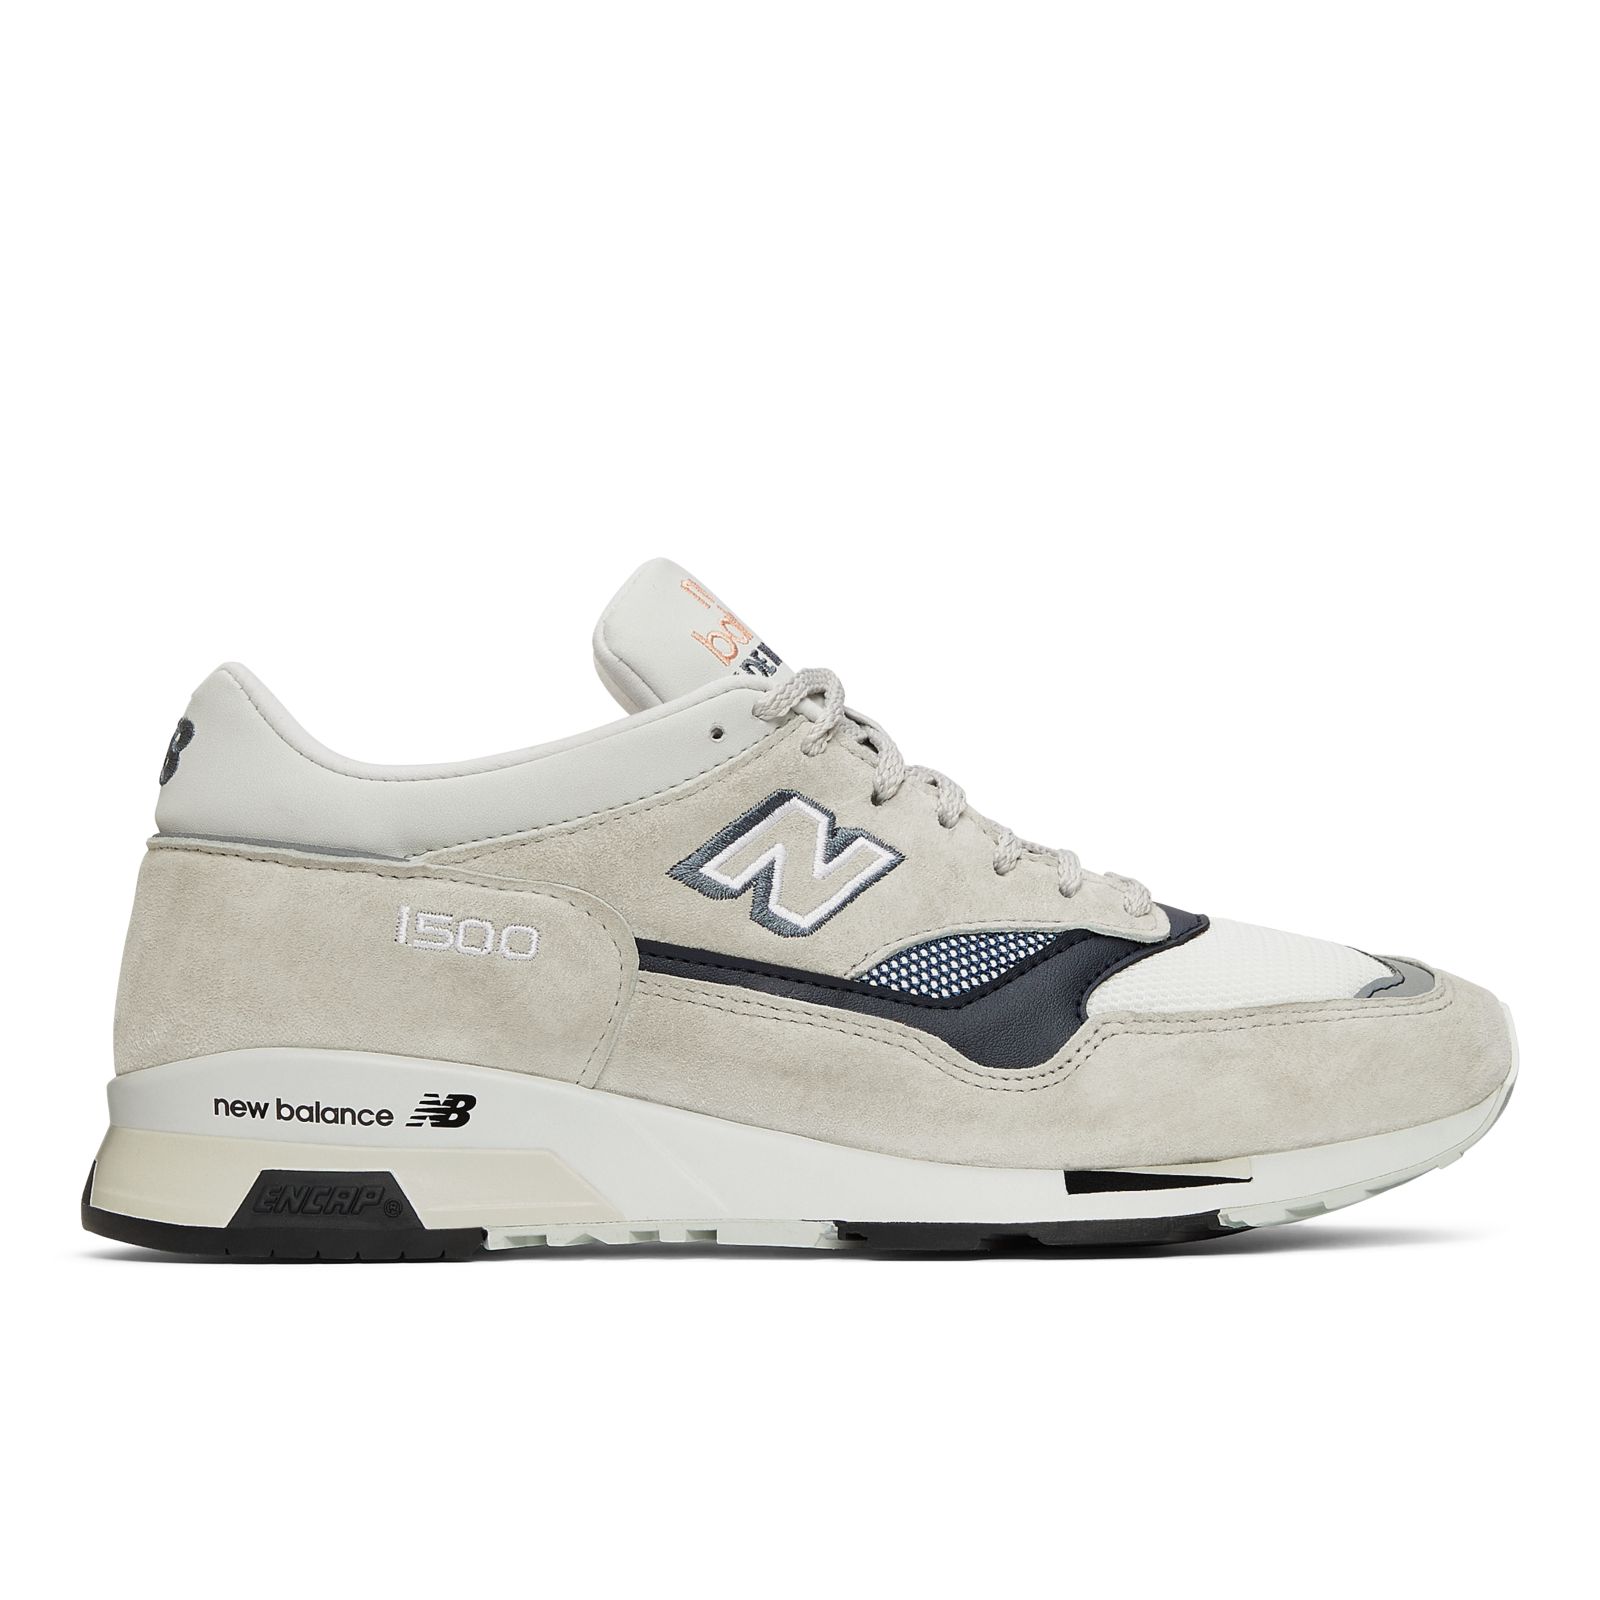 Men's MADE in UK 1500 Shoes - New Balance